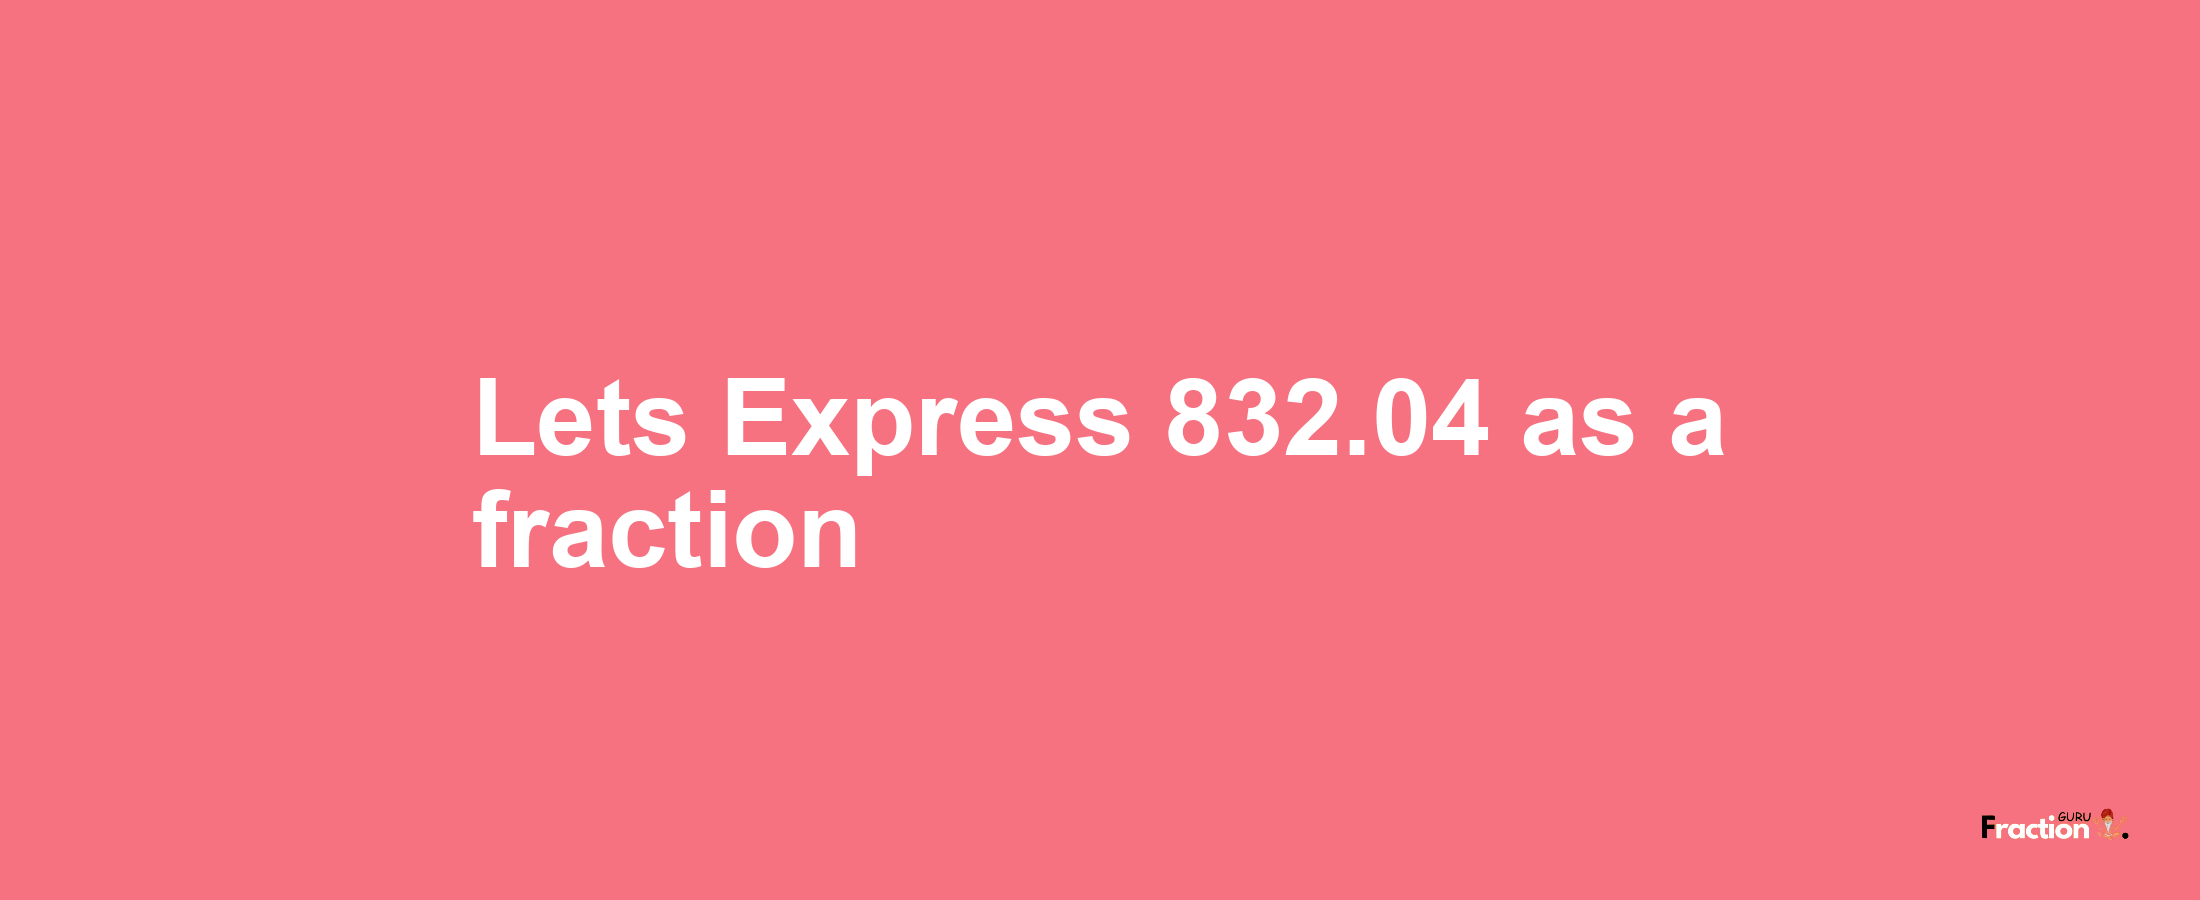 Lets Express 832.04 as afraction